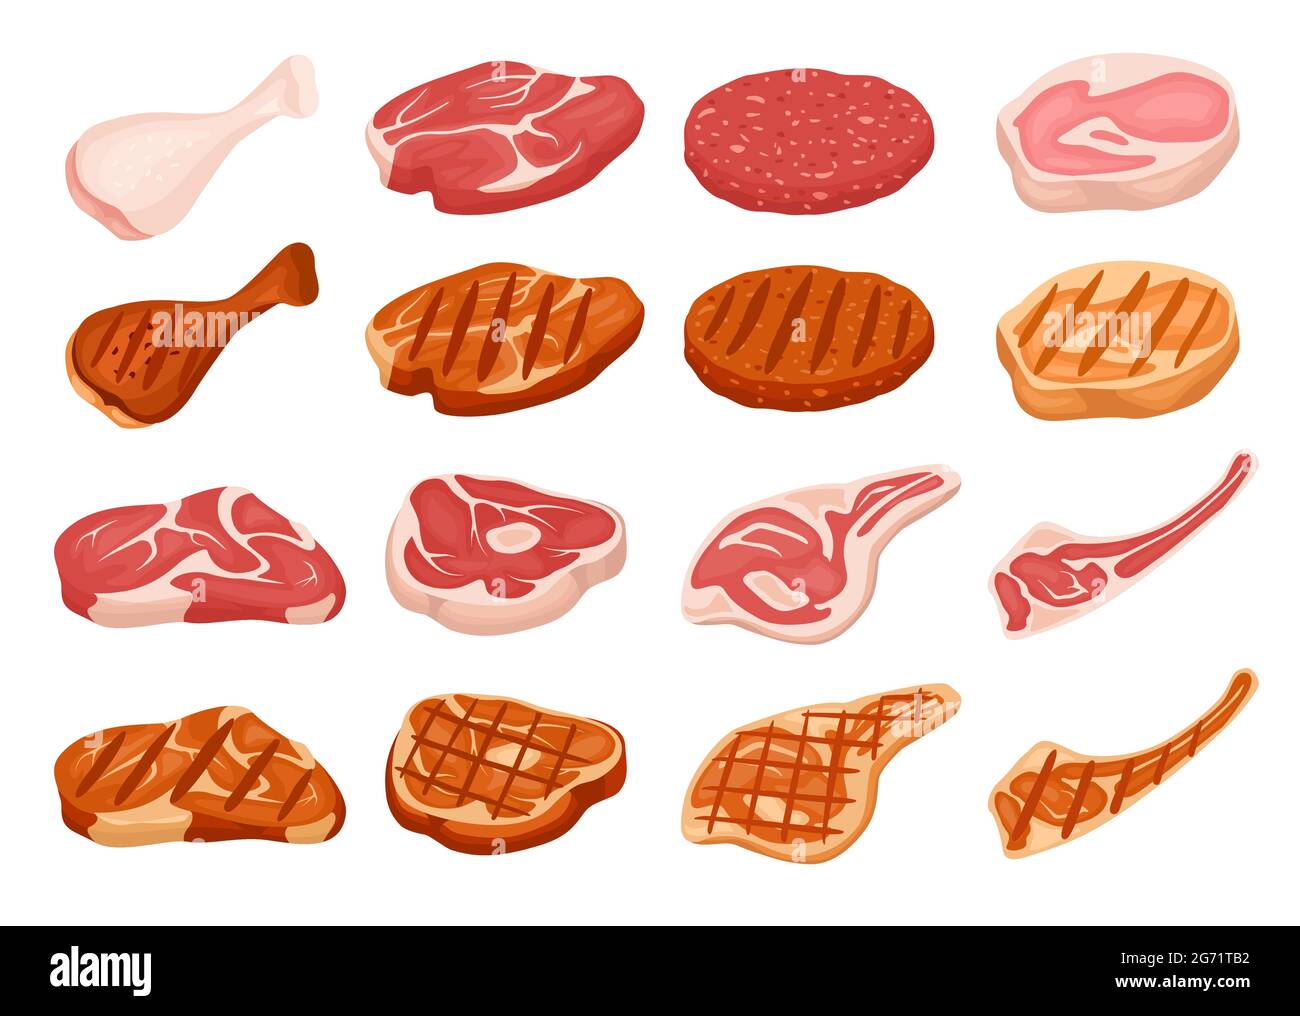 Fresh and grilled meat. Cartoon fried steak with grill marks. Chicken, pork, beef, burger patty. Raw, cooked and roasted meat vector set. Food for bbq, meal from butcher shop isolated Stock Vector